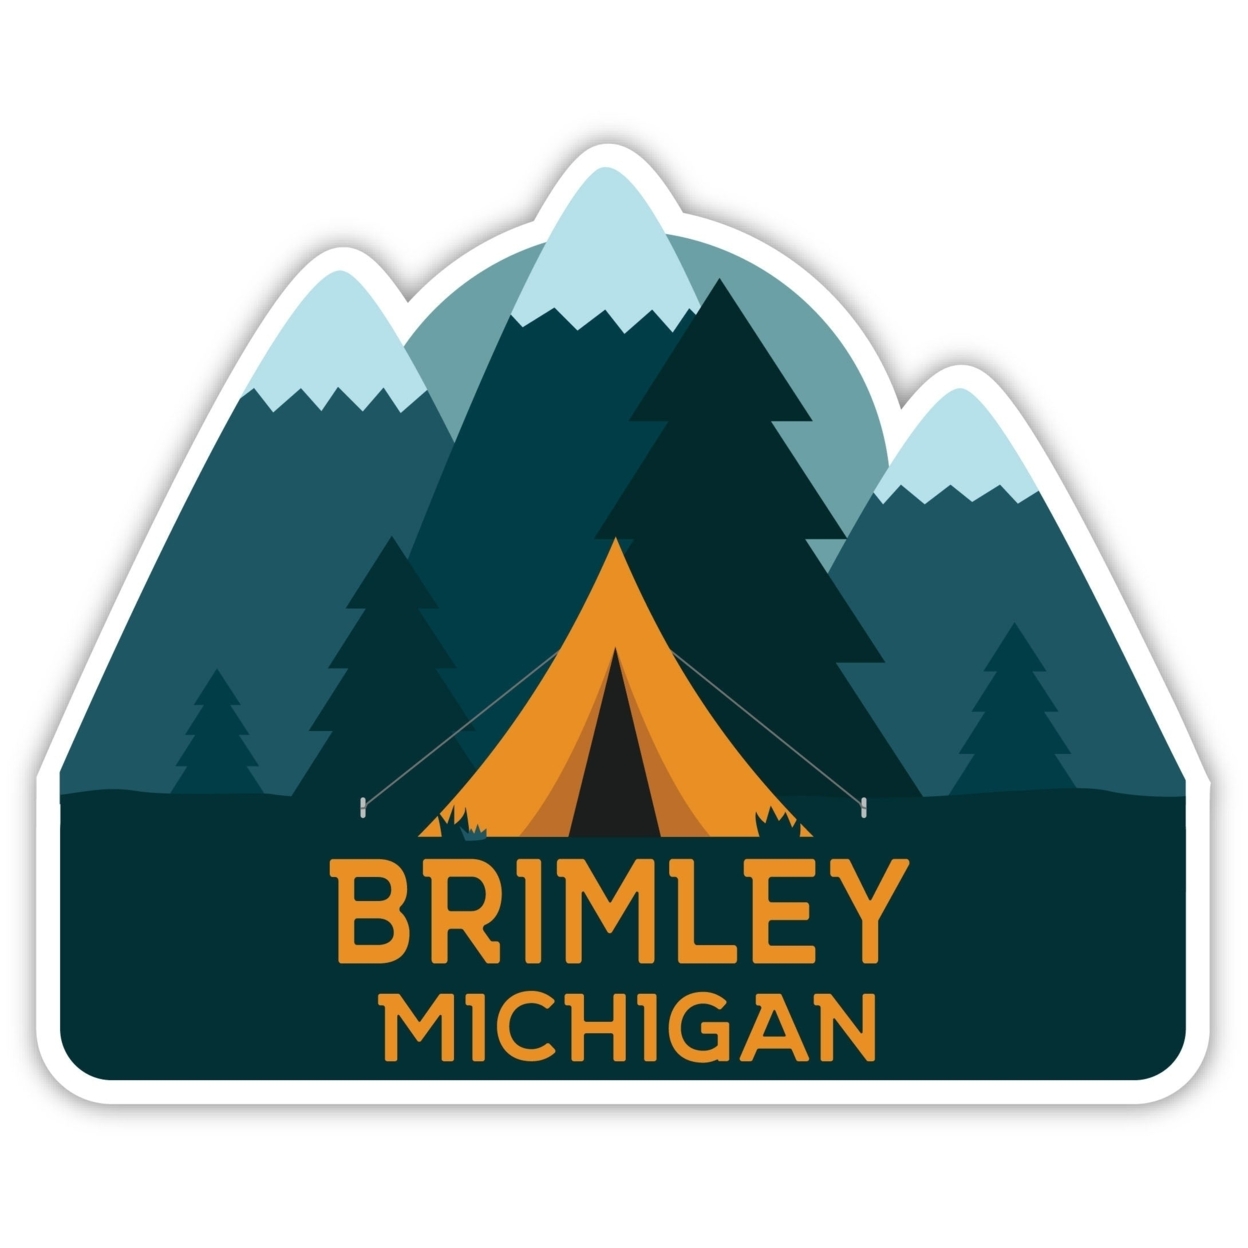 Brimley Michigan Souvenir Decorative Stickers (Choose Theme And Size) - 4-Pack, 2-Inch, Tent